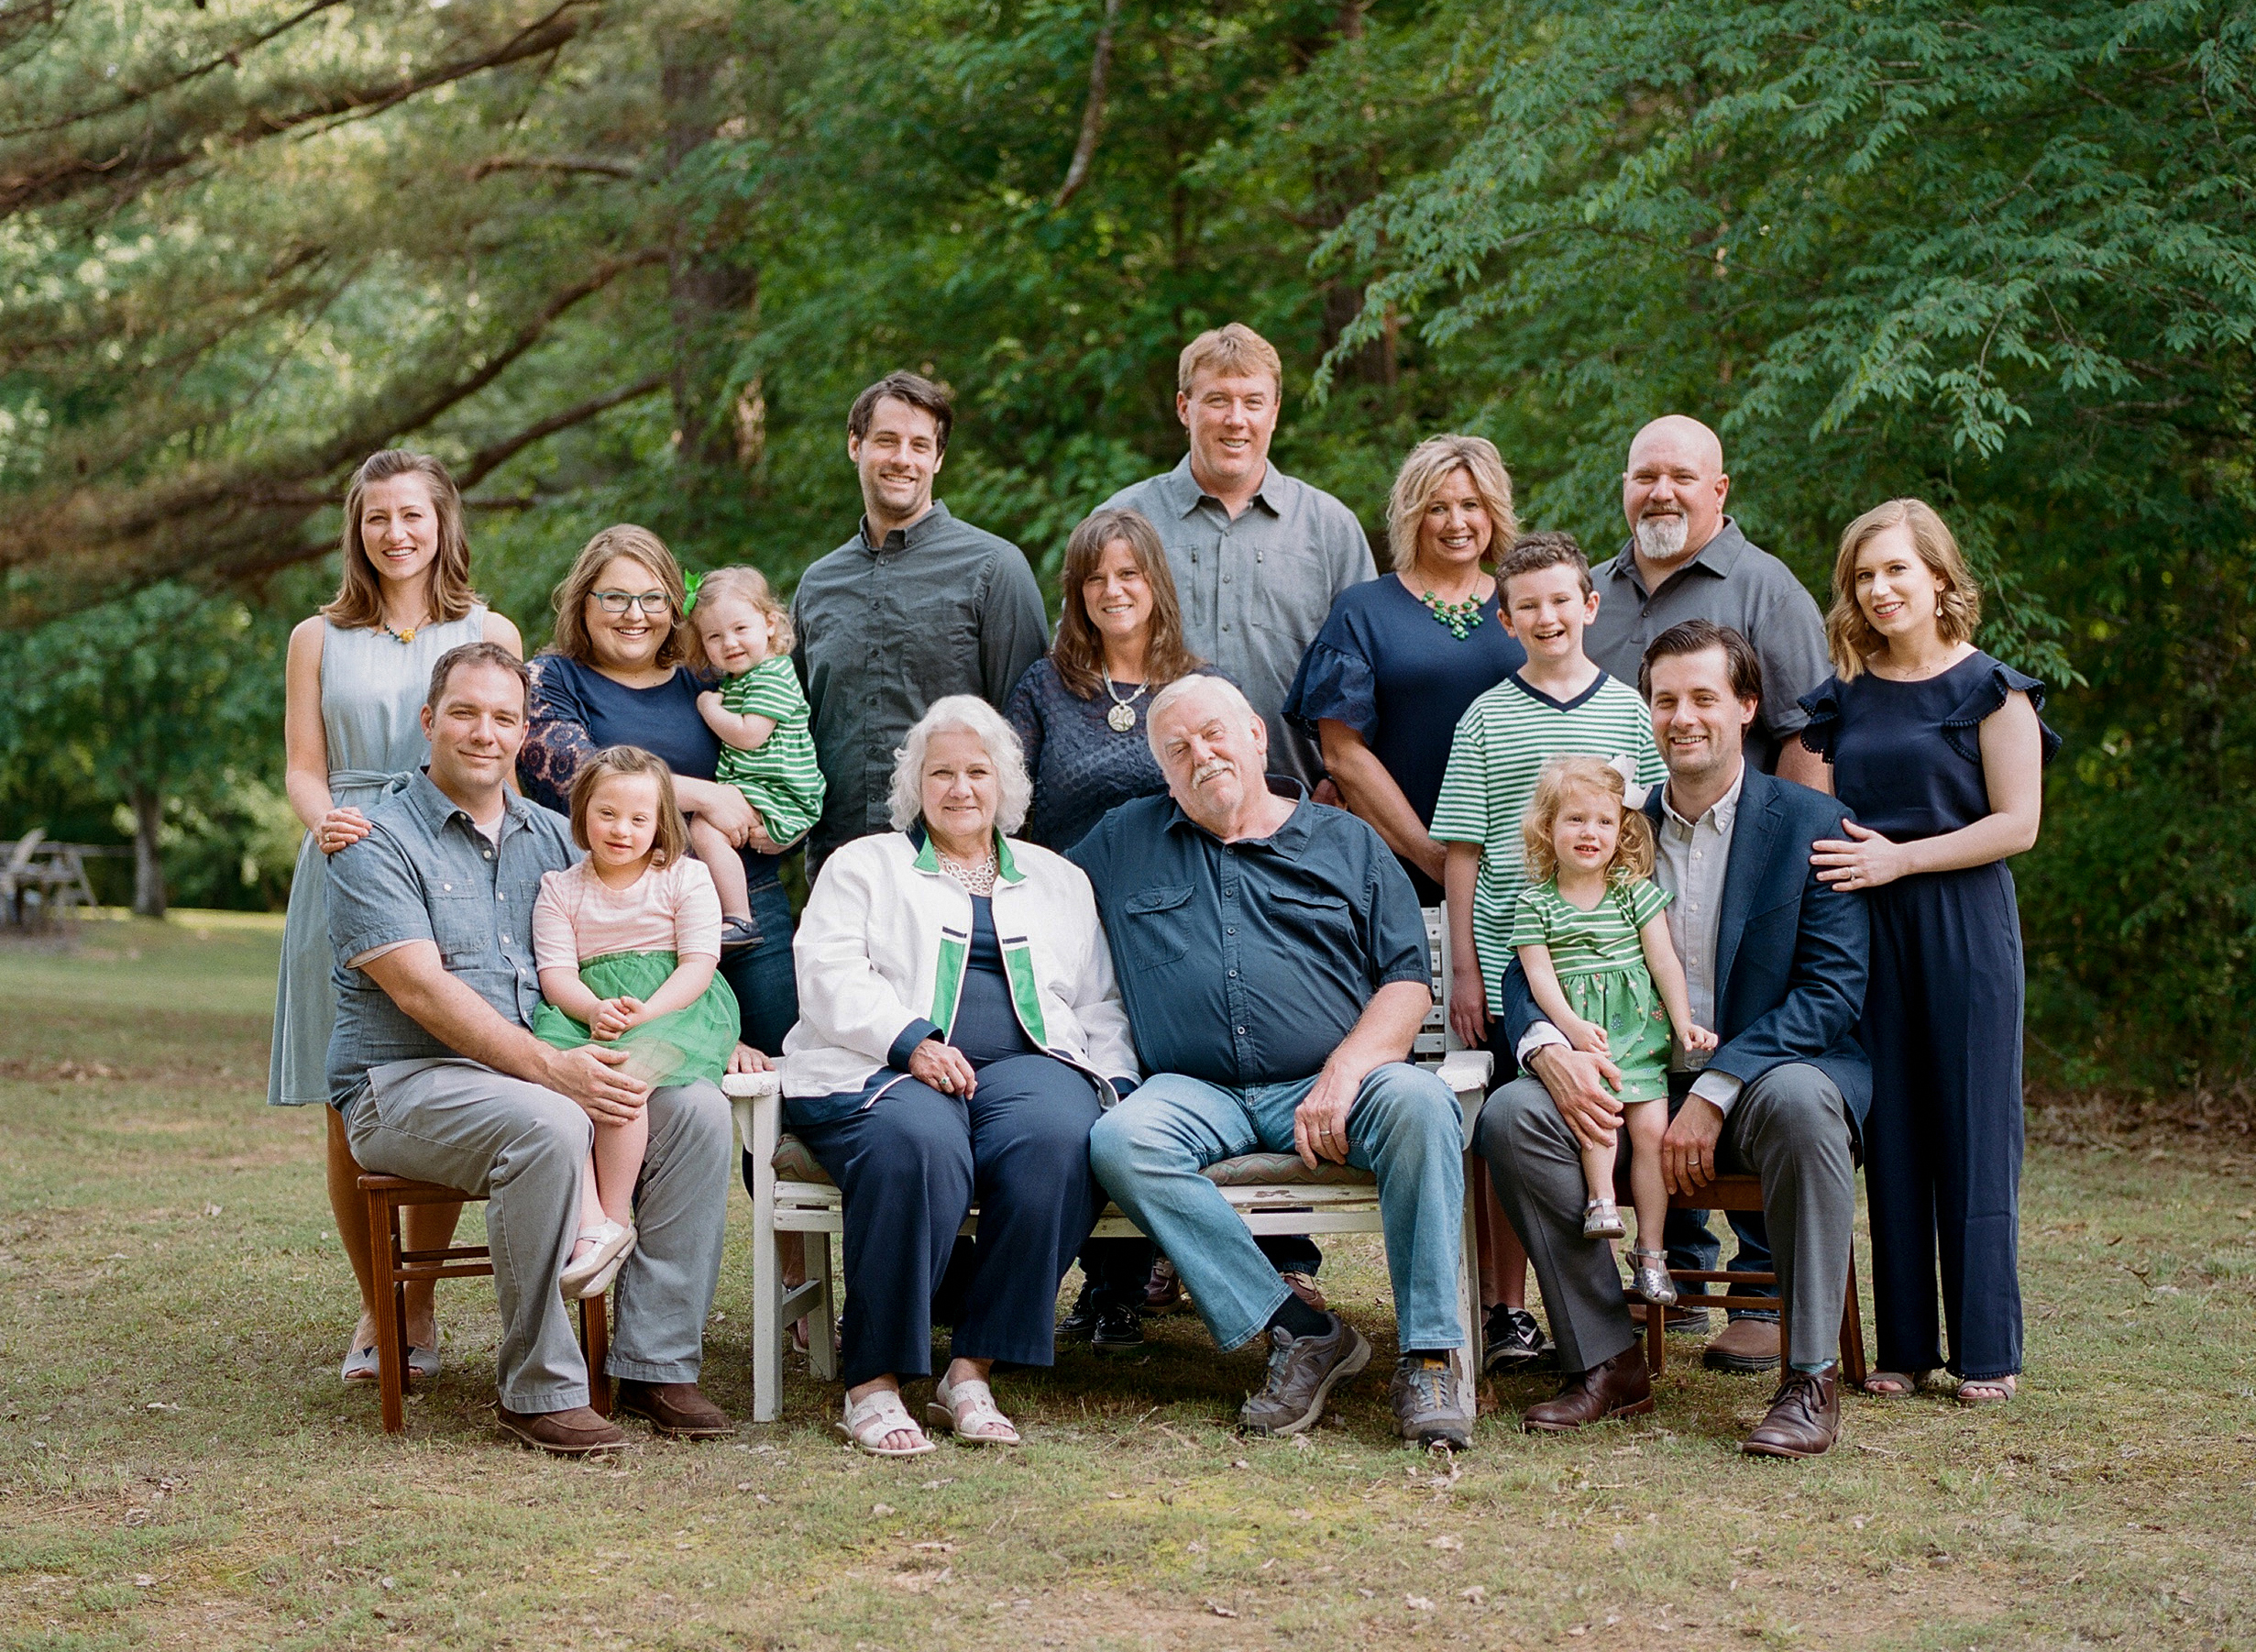 The Epstein's Extended Family Photography Session at Cabin John Regional  Park in Bethesda